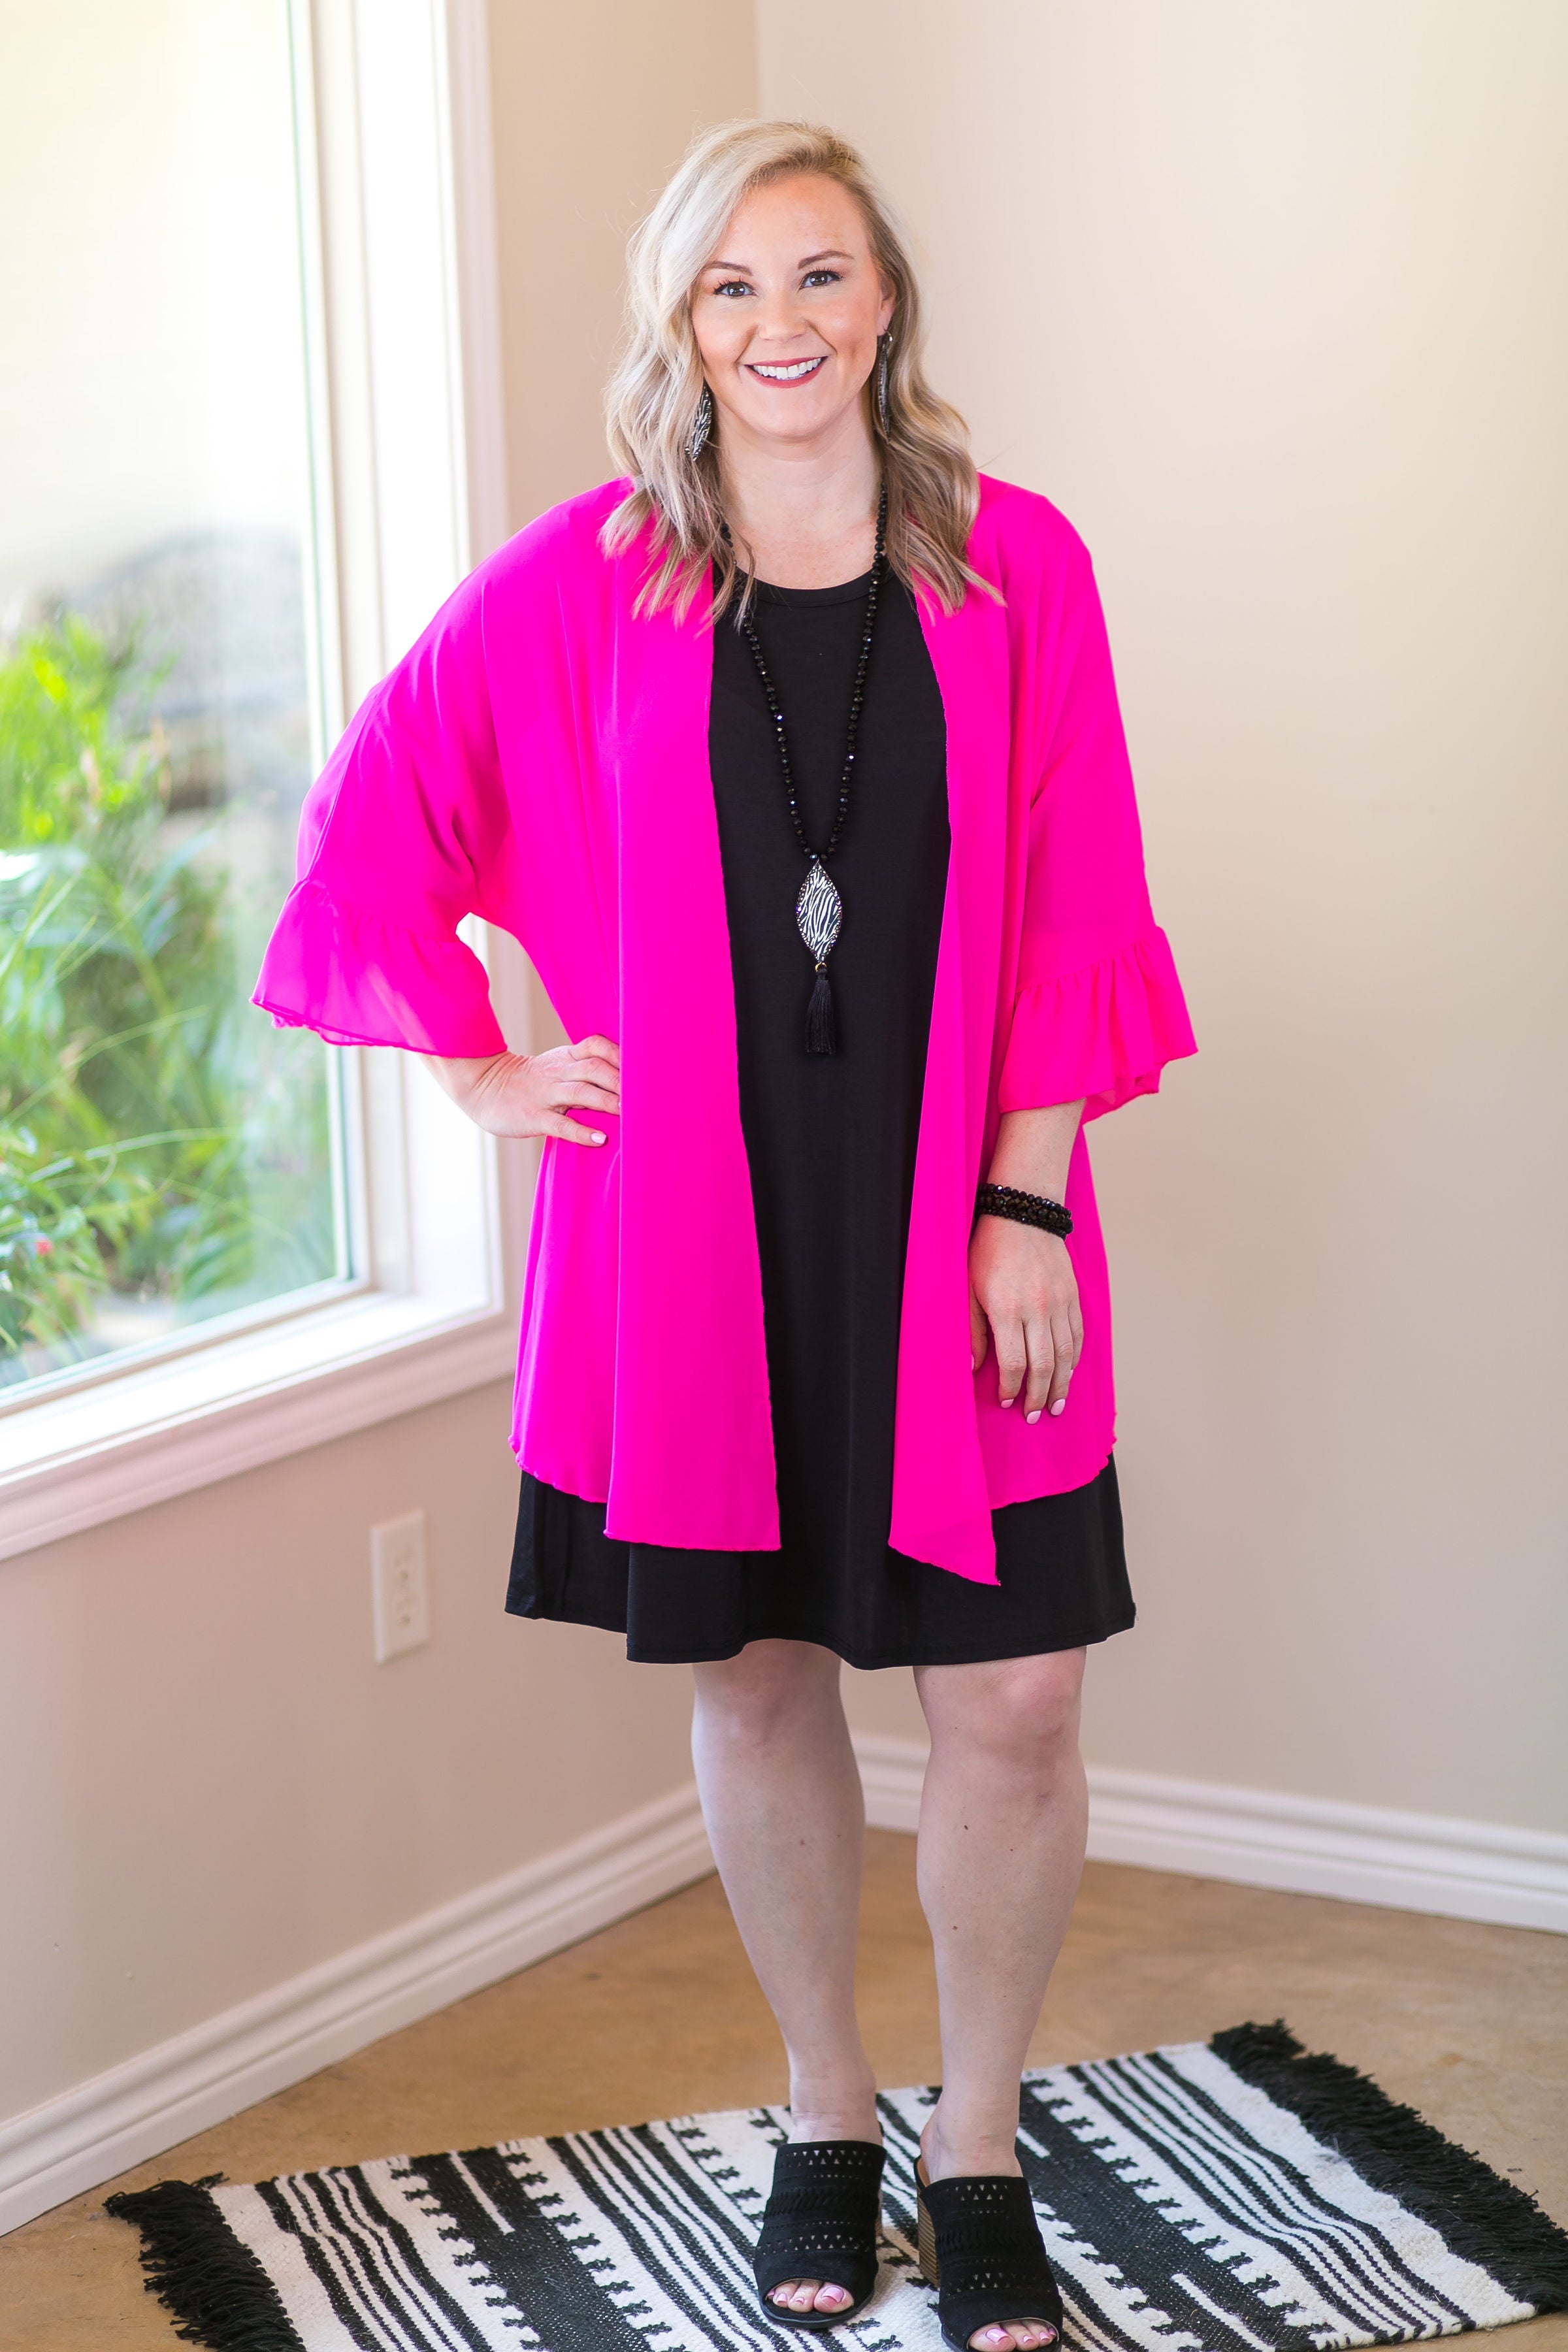 women's missy curvy girl fashions plus size kimono duster cover up boutique trendy sheer neon pink hot pink fuchsia 